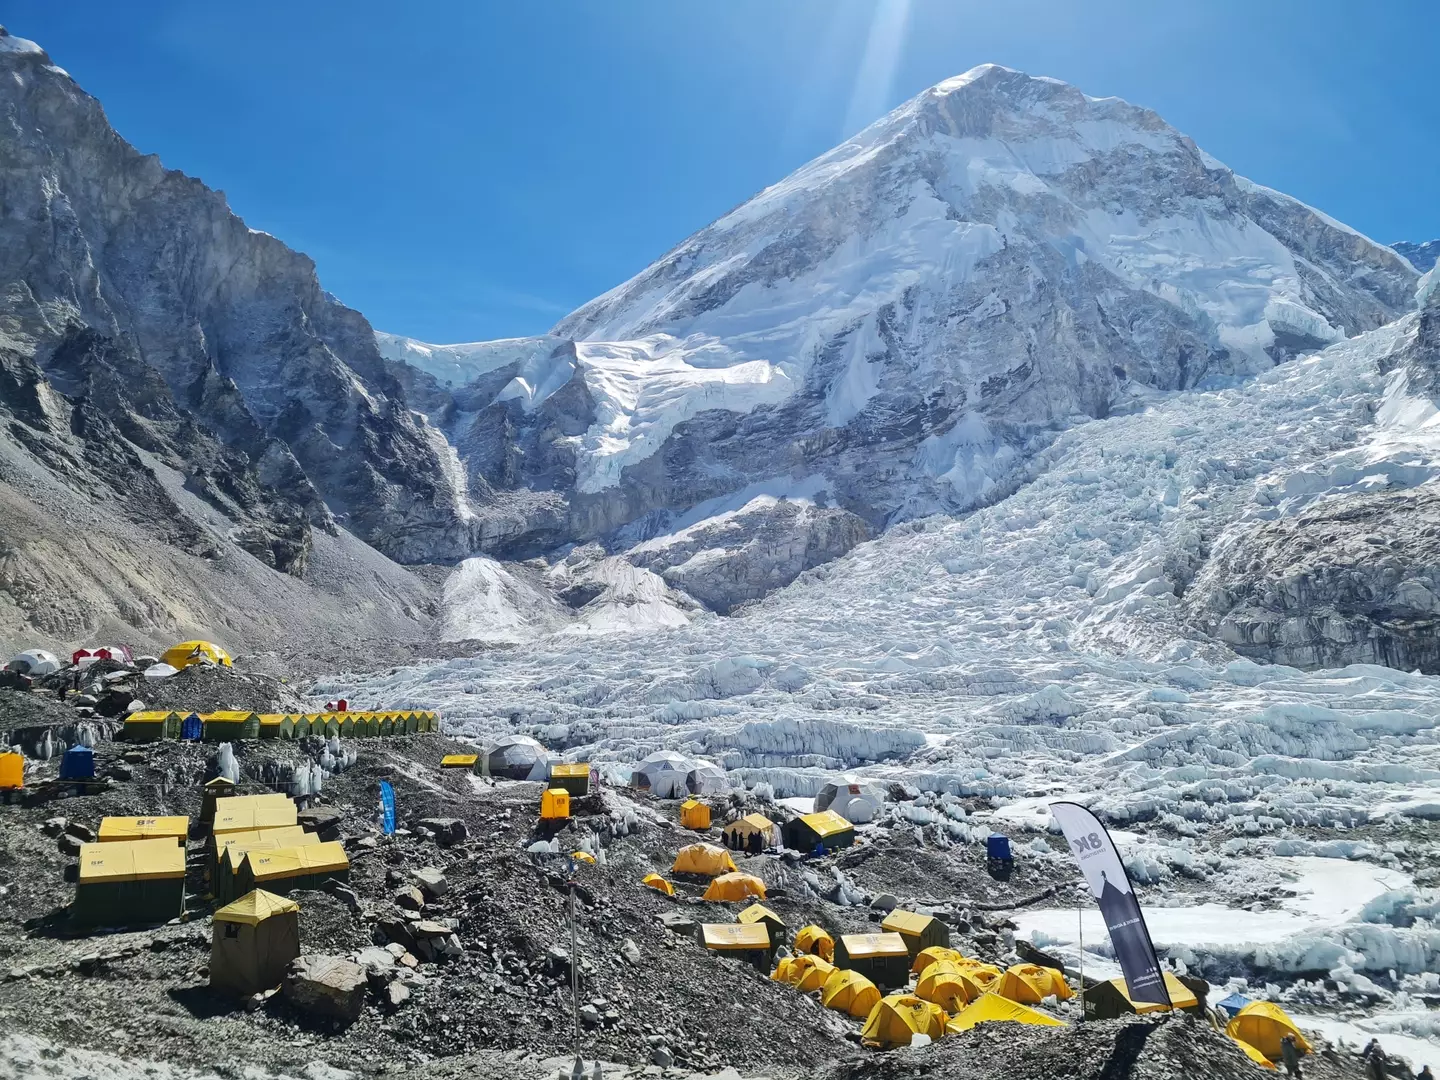 The mountain clean-up takes place annually. (PURNIMA SHRESTHA/AFP via Getty Images)